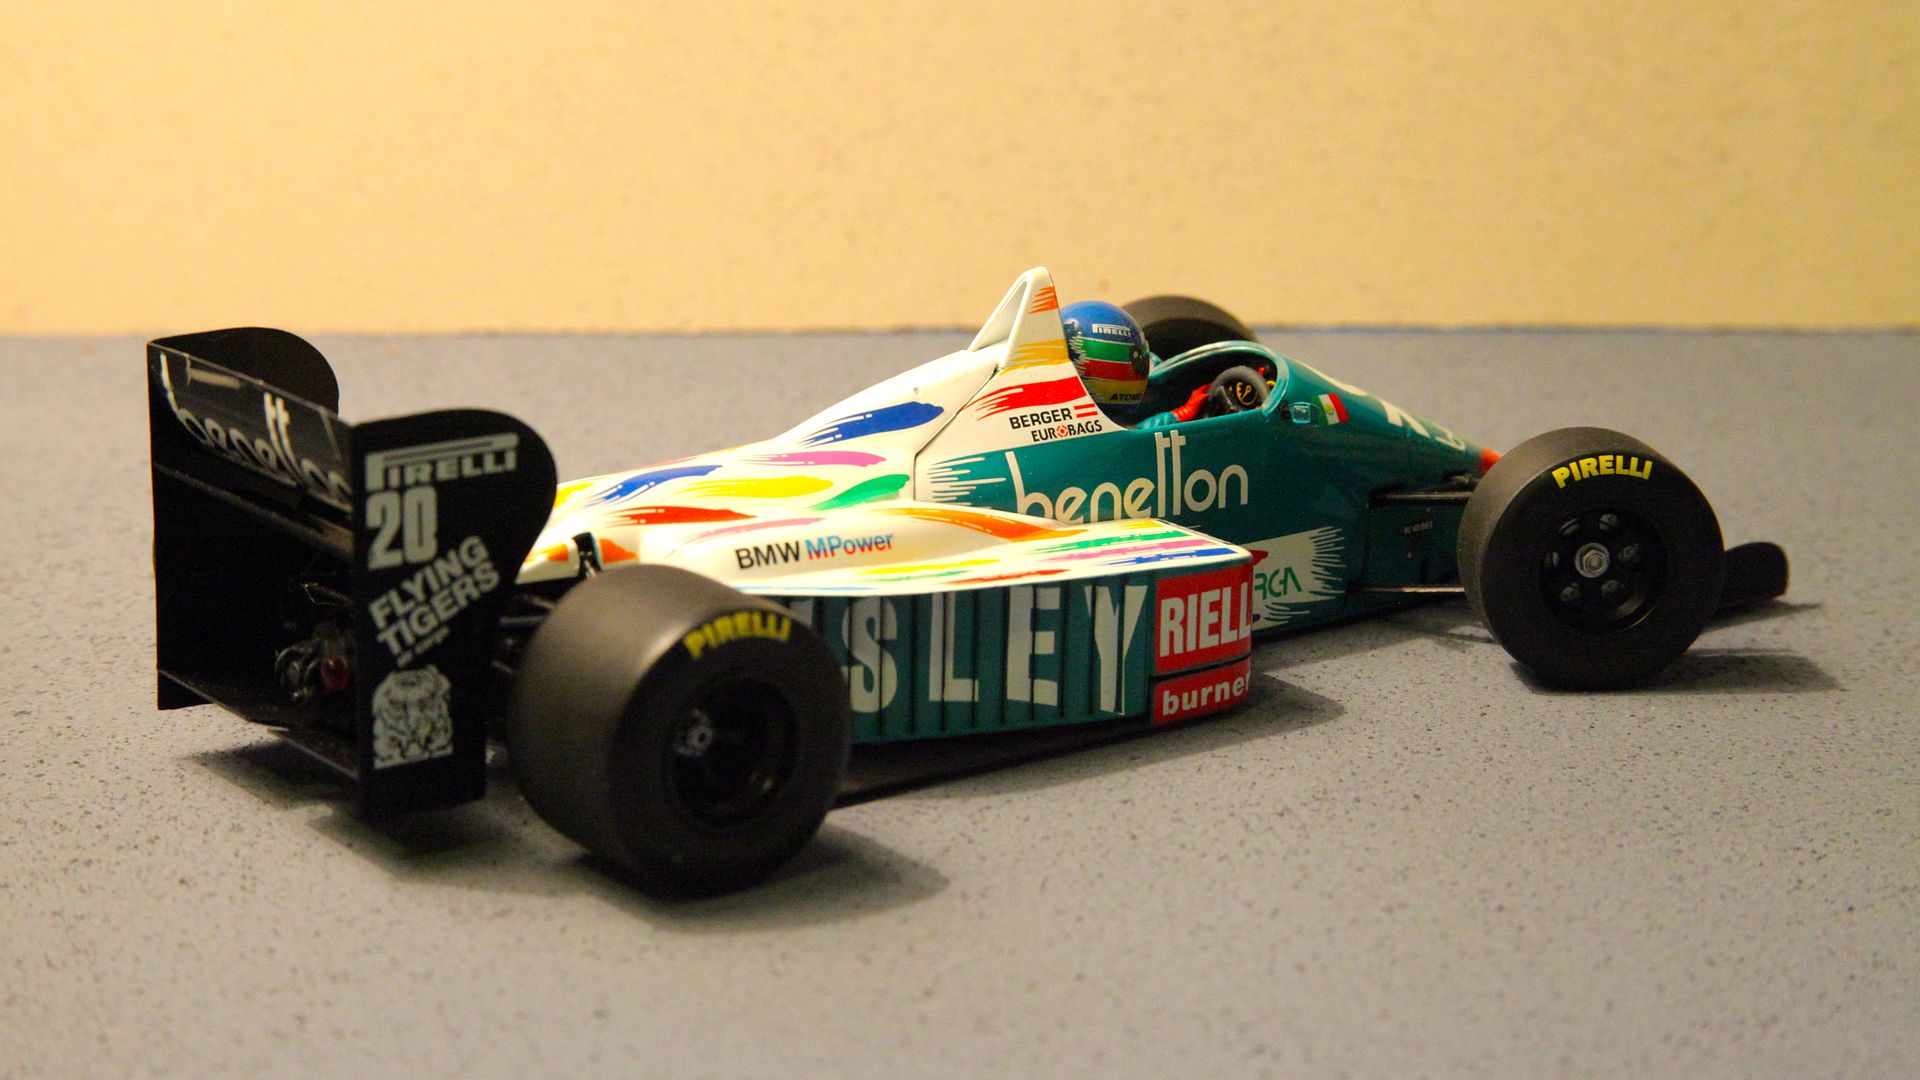 My attempt to collect 1 F1 car from each year - NEW PHOTOS of the